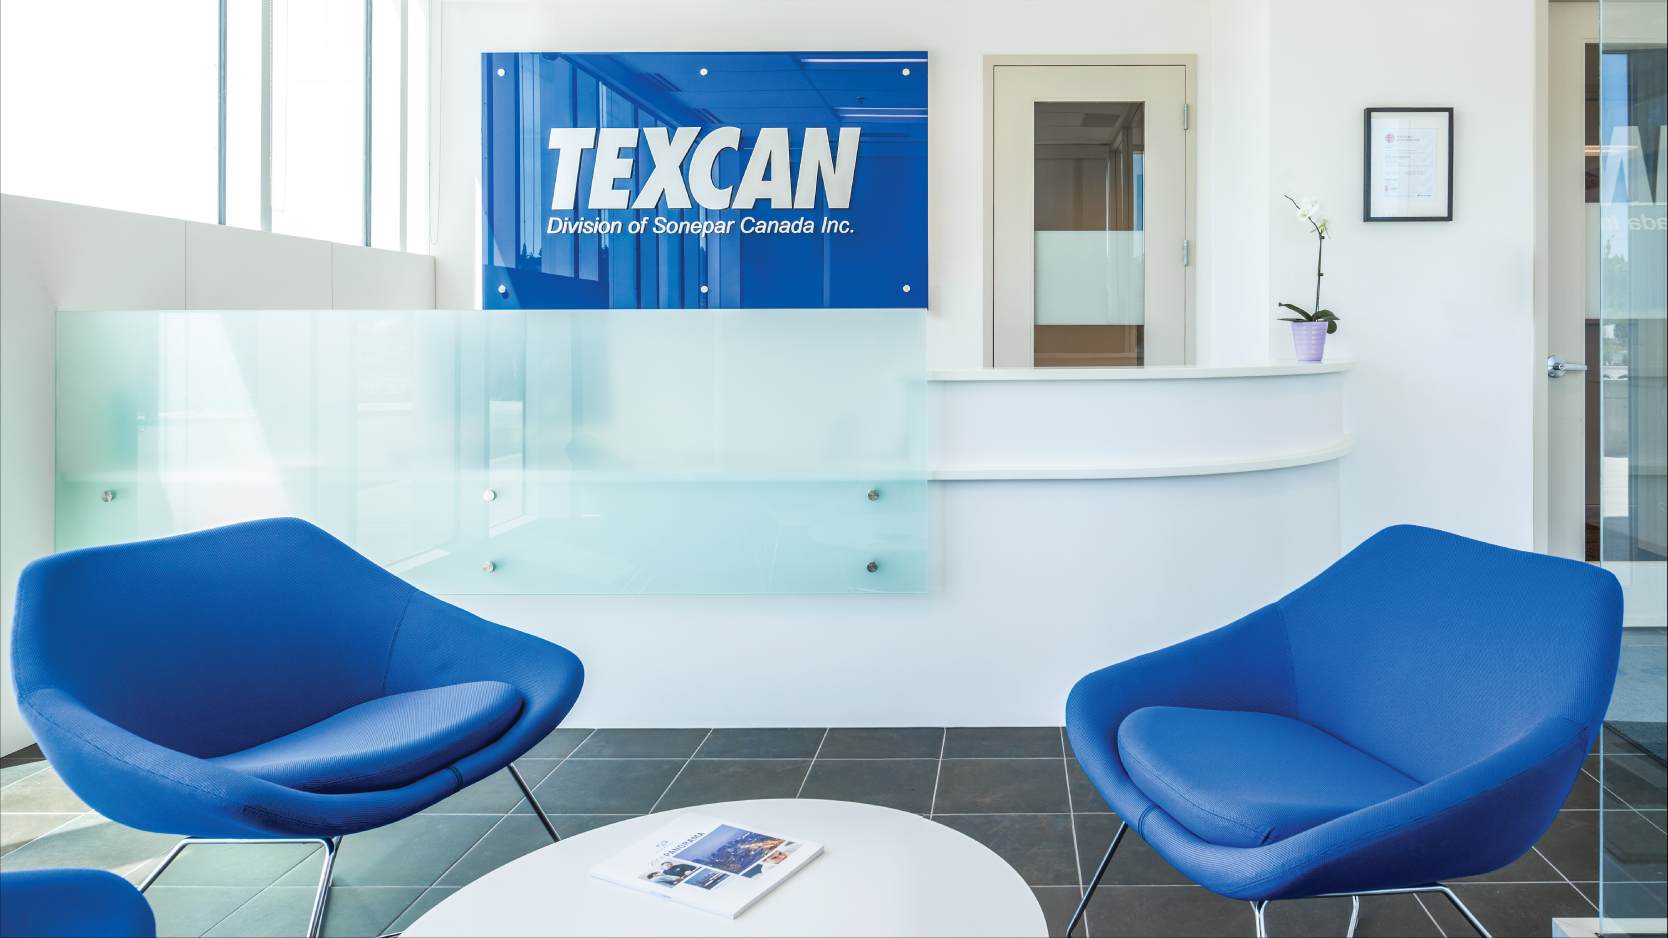 Texcan - About Us (View All) - Corporate Overview